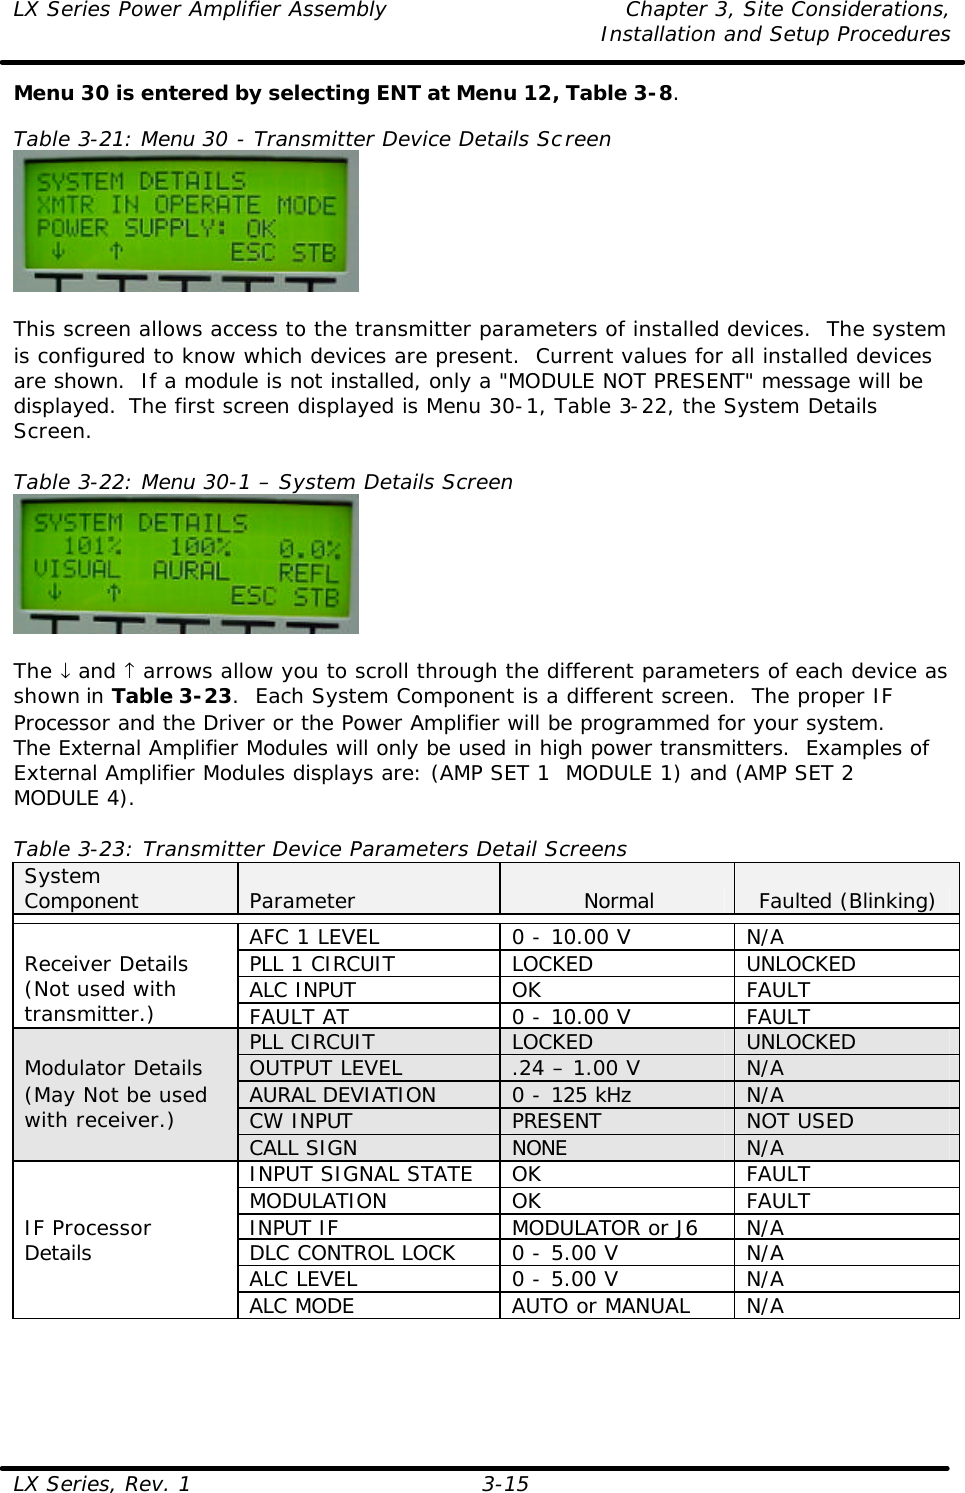 LX Series Power Amplifier Assembly Chapter 3, Site Considerations,   Installation and Setup Procedures LX Series, Rev. 1 3-15 Menu 30 is entered by selecting ENT at Menu 12, Table 3-8.  Table 3-21: Menu 30 - Transmitter Device Details Screen   This screen allows access to the transmitter parameters of installed devices.  The system is configured to know which devices are present.  Current values for all installed devices are shown.  If a module is not installed, only a &quot;MODULE NOT PRESENT&quot; message will be displayed.  The first screen displayed is Menu 30-1, Table 3-22, the System Details Screen.  Table 3-22: Menu 30-1 – System Details Screen   The ↓ and ↑ arrows allow you to scroll through the different parameters of each device as shown in Table 3-23.  Each System Component is a different screen.  The proper IF Processor and the Driver or the Power Amplifier will be programmed for your system.  The External Amplifier Modules will only be used in high power transmitters.  Examples of External Amplifier Modules displays are: (AMP SET 1  MODULE 1) and (AMP SET 2  MODULE 4).  Table 3-23: Transmitter Device Parameters Detail Screens System Component Parameter Normal Faulted (Blinking)  AFC 1 LEVEL 0 - 10.00 V N/A PLL 1 CIRCUIT LOCKED UNLOCKED ALC INPUT OK FAULT Receiver Details (Not used with transmitter.) FAULT AT 0 - 10.00 V FAULT PLL CIRCUIT LOCKED UNLOCKED OUTPUT LEVEL .24 – 1.00 V N/A AURAL DEVIATION  0 - 125 kHz N/A CW INPUT PRESENT NOT USED Modulator Details (May Not be used with receiver.) CALL SIGN NONE N/A INPUT SIGNAL STATE OK FAULT MODULATION OK FAULT INPUT IF MODULATOR or J6 N/A DLC CONTROL LOCK 0 - 5.00 V N/A ALC LEVEL 0 - 5.00 V N/A IF Processor Details ALC MODE AUTO or MANUAL N/A  